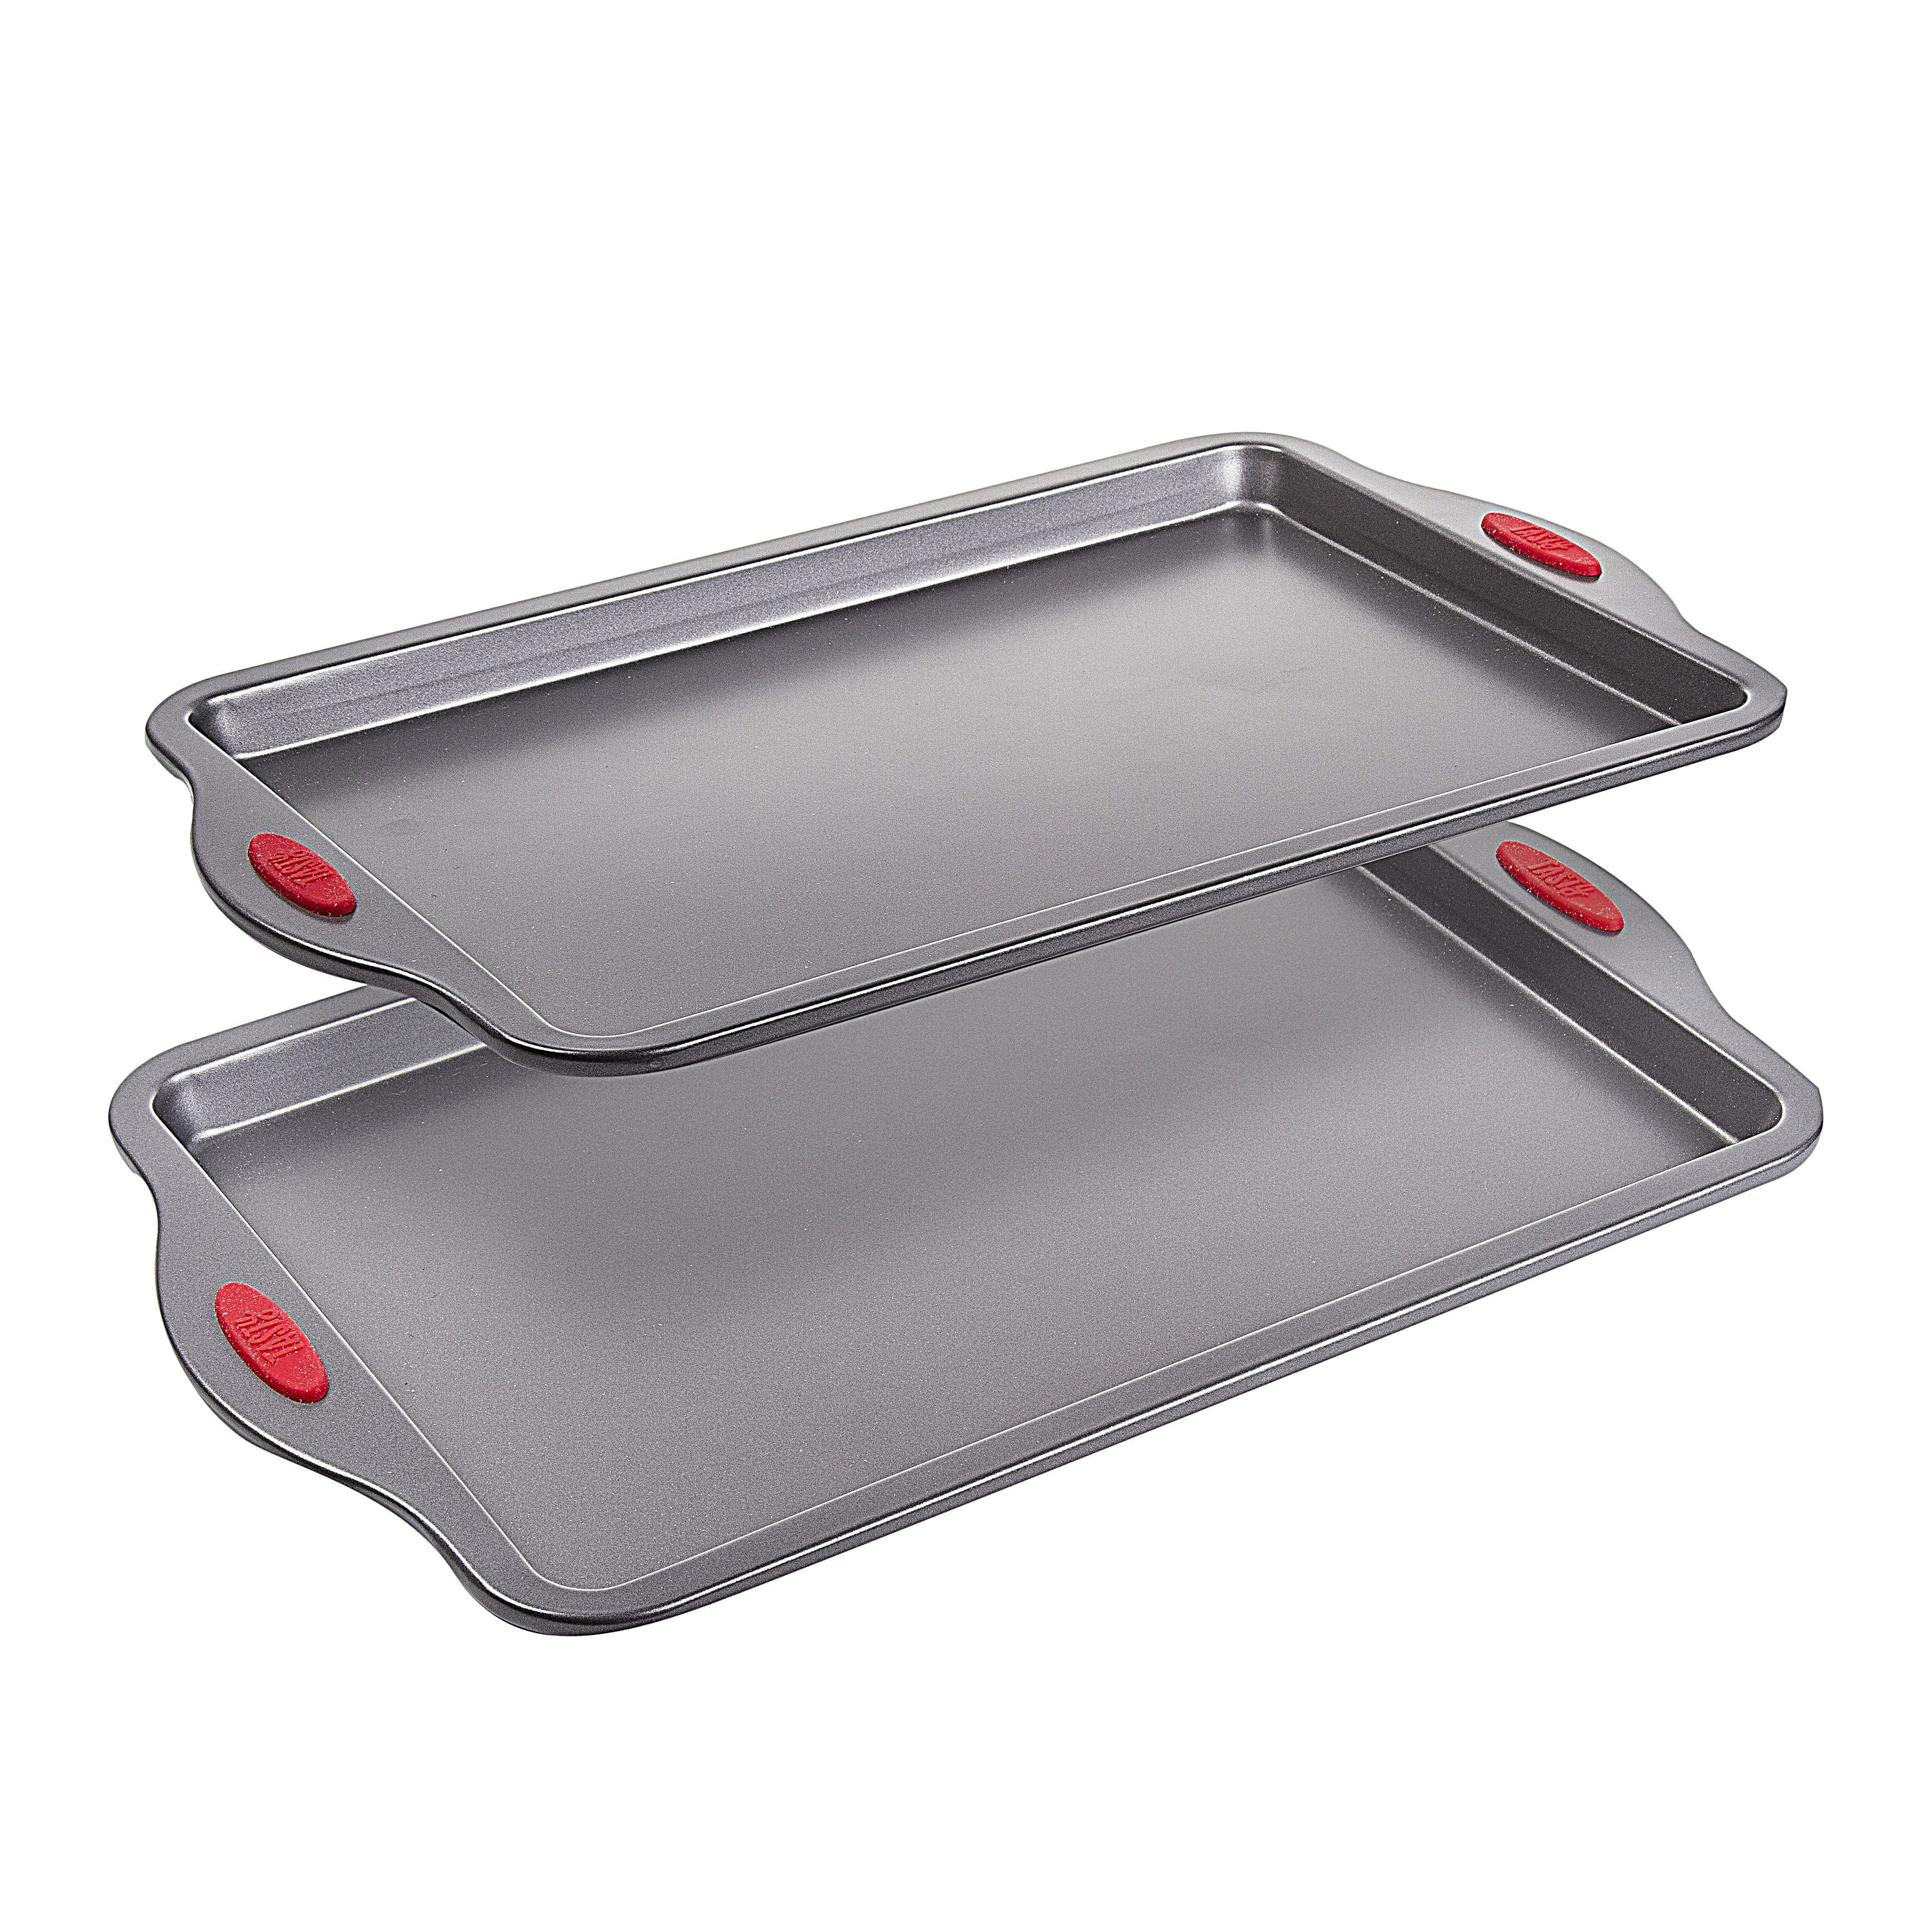 Hastings Home 3pc Nonstick Cookie Sheet Set With Silicone Handles -  20313629